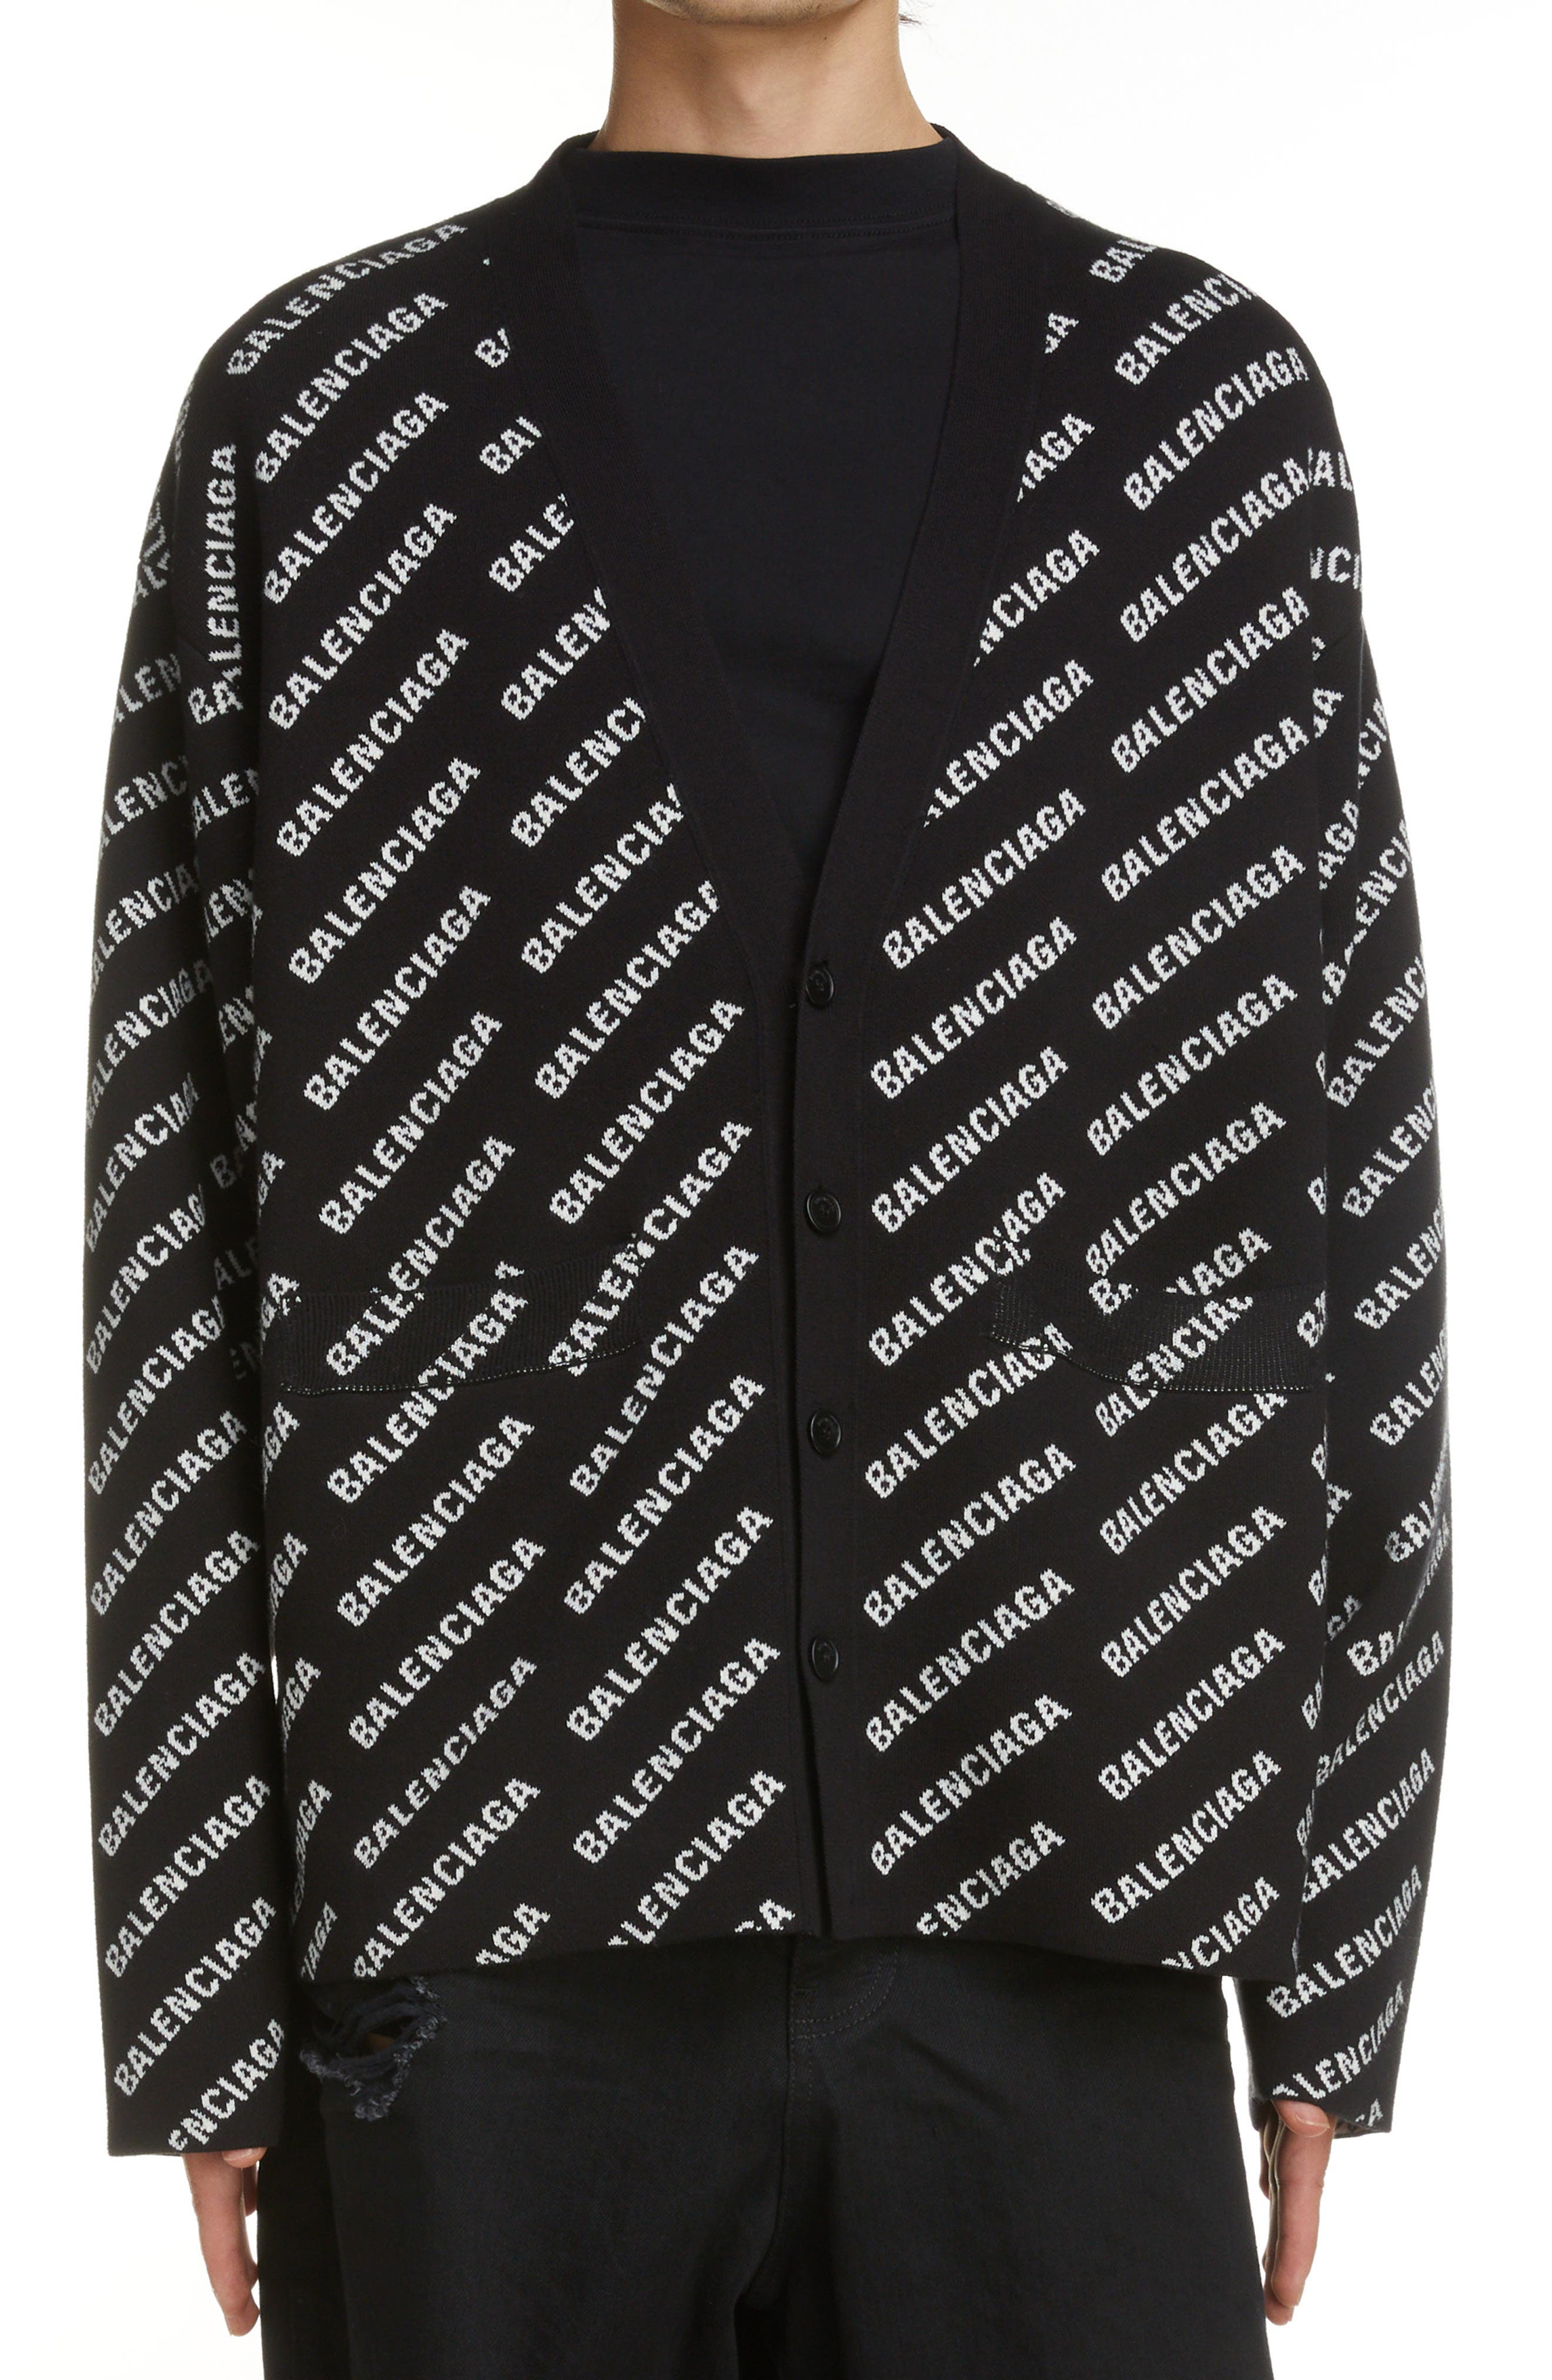 Made in Italy Cardigan black-white allover print business style Fashion Jackets Cardigans 